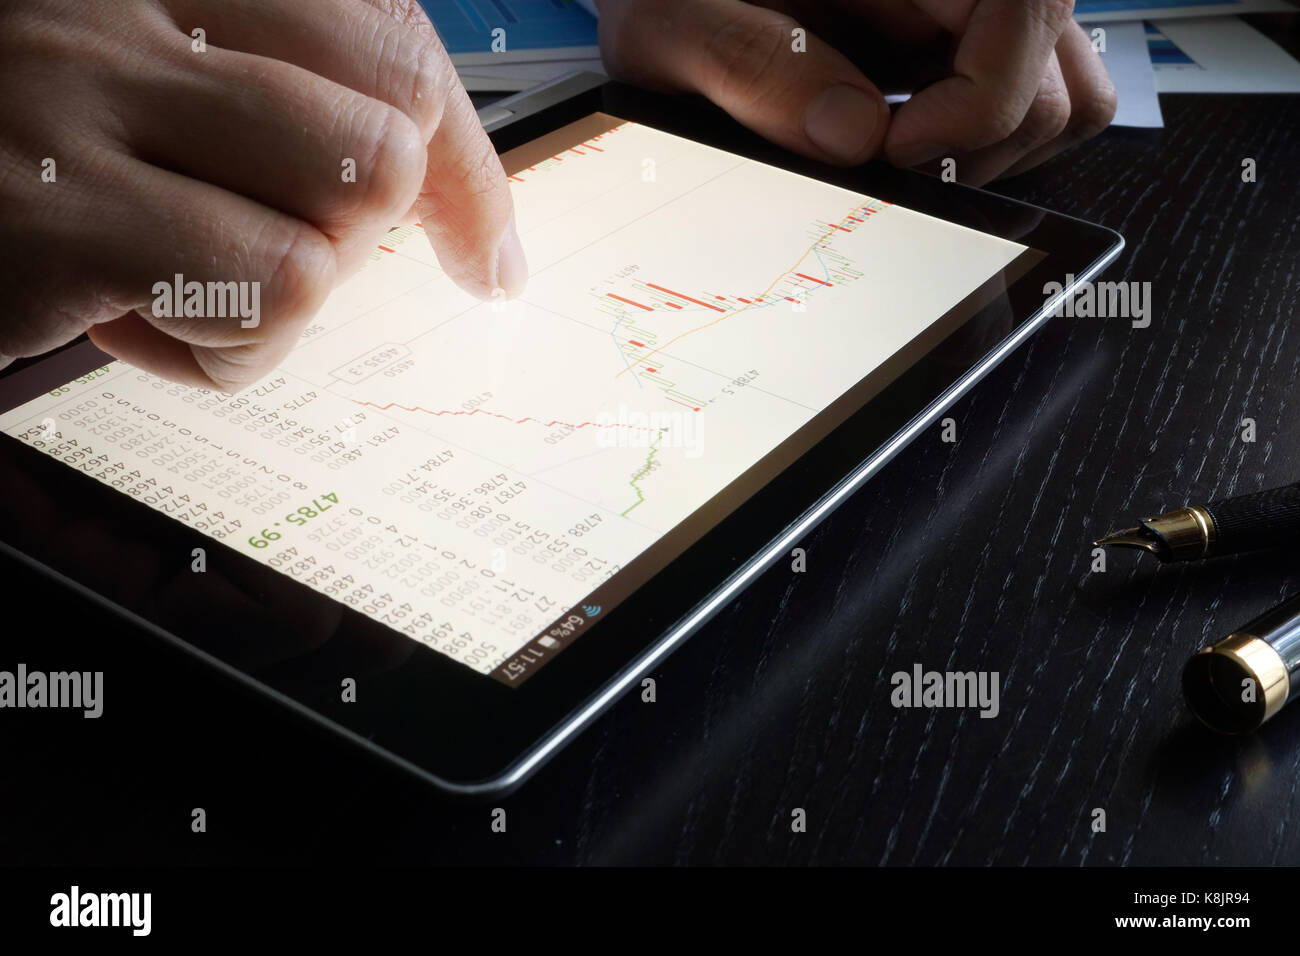 Stock trading data on a tablet screen. Stock Photo